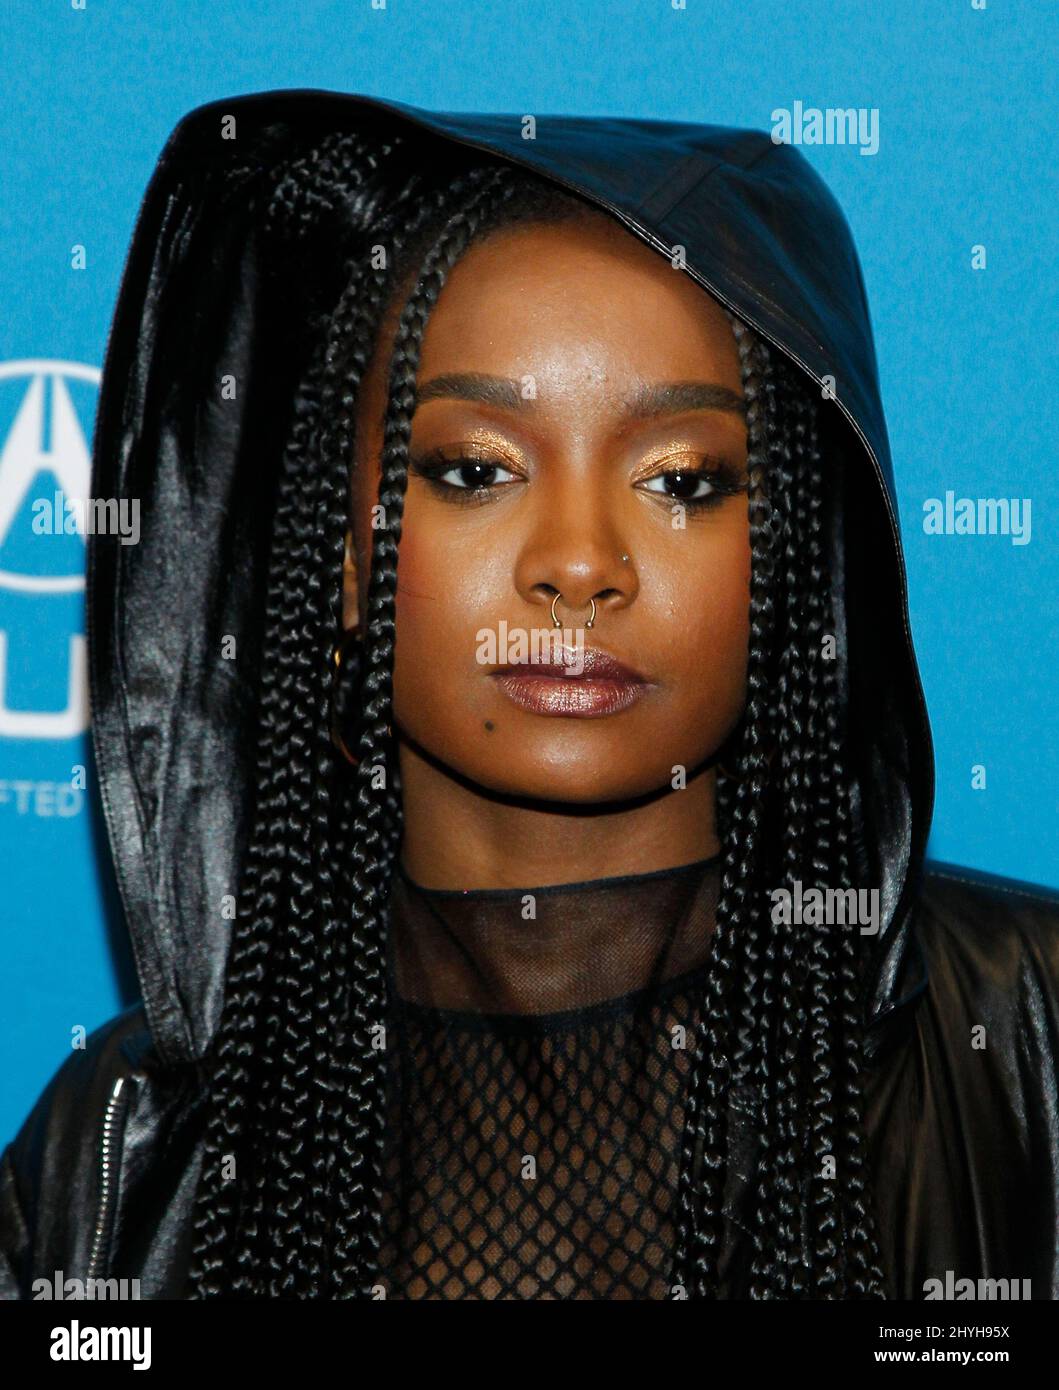 KiKi Layne at the premiere of 'Native Son' during the 2019 Sundance Film Festival held at the Eccles Theatre on January 24, 2019 in Park City, UT. Stock Photo